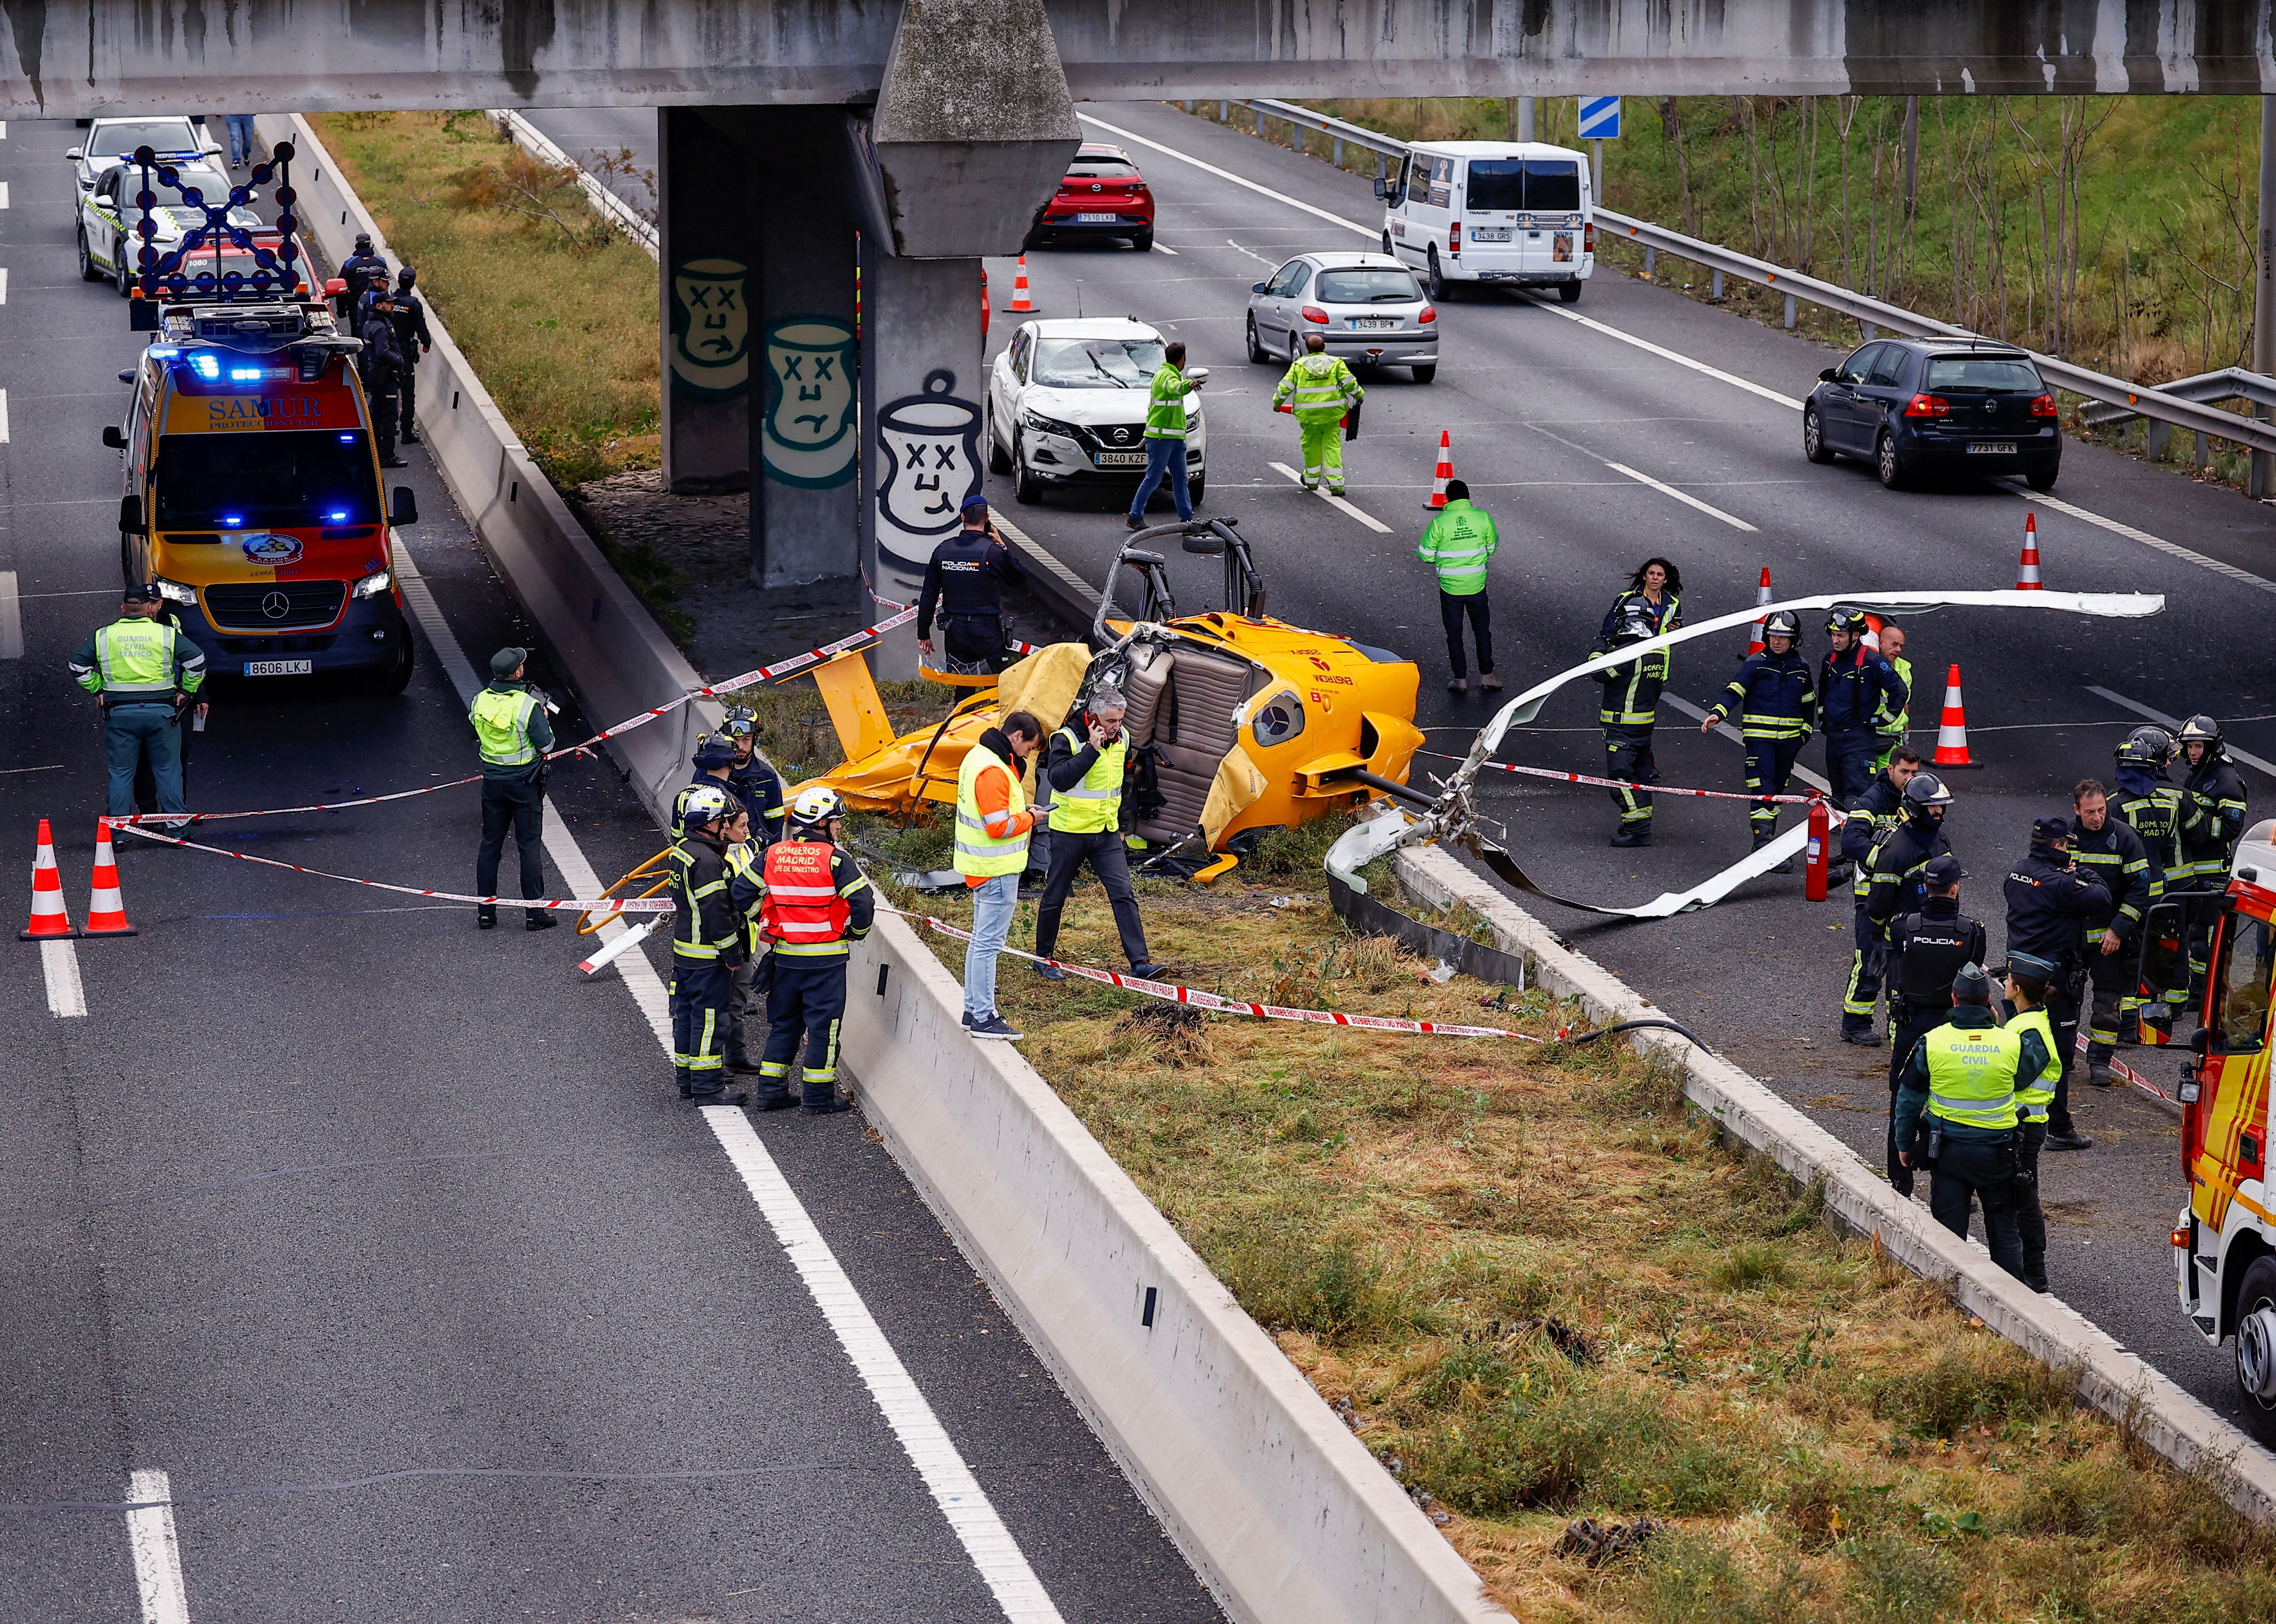 The helicopter’s mangled rotor blades lie across two motorway lanes